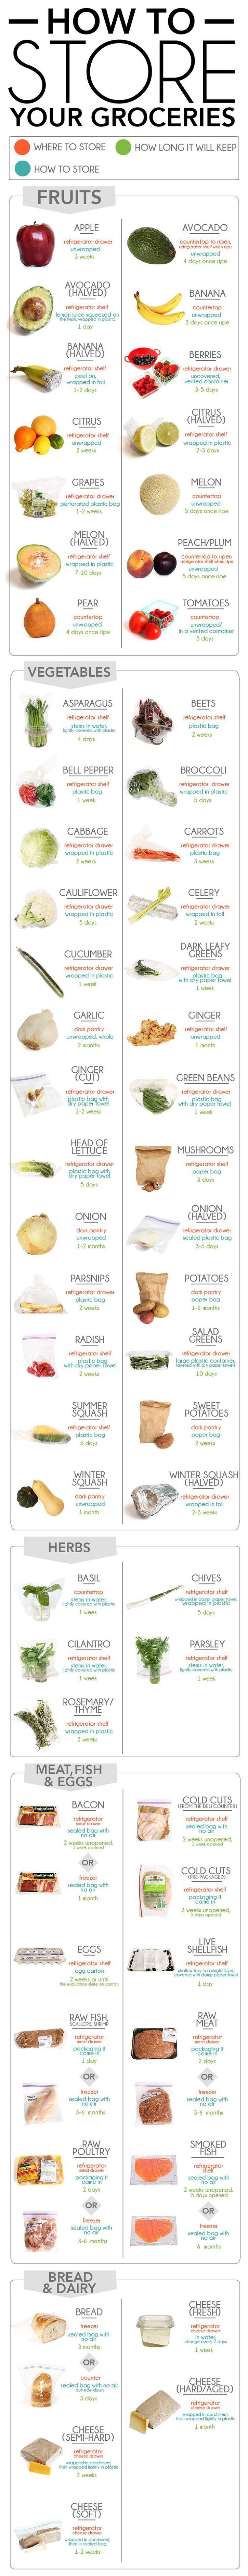 how to store groceries infographic